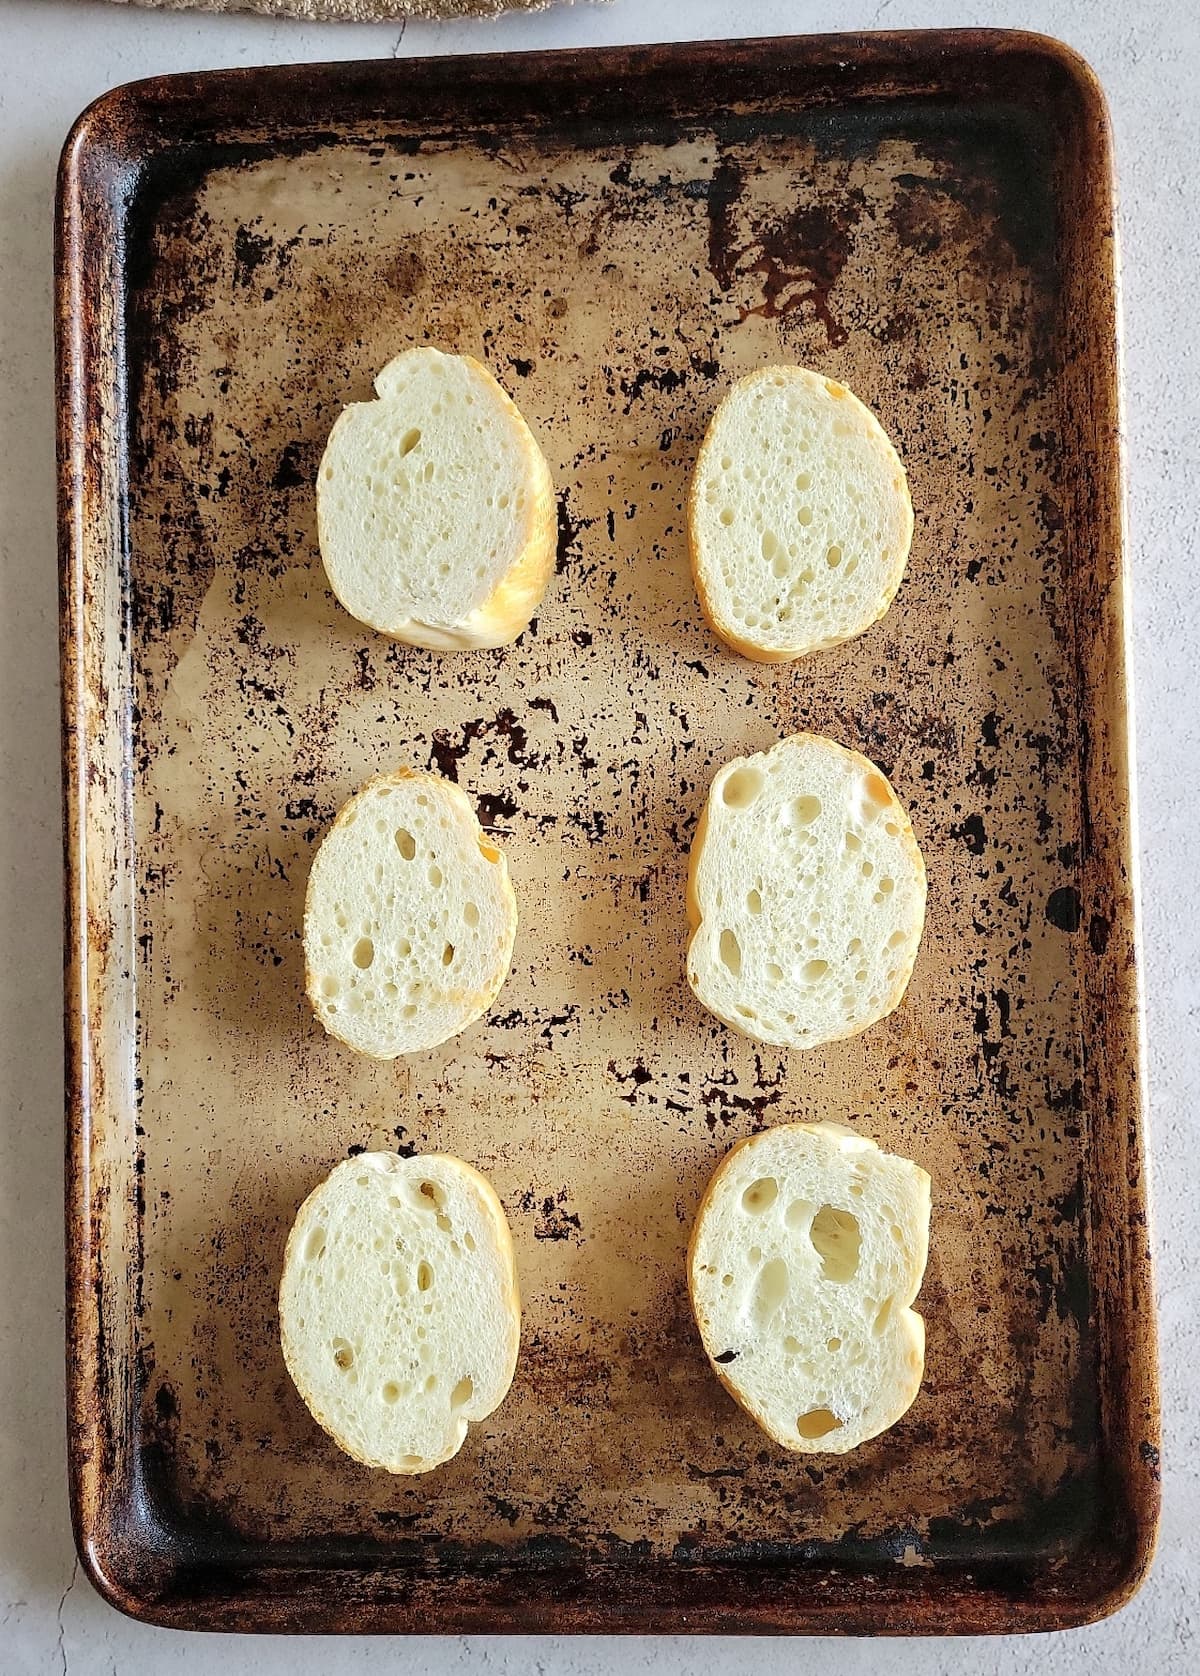 6 un-toasted baguette rounds on a baking sheet